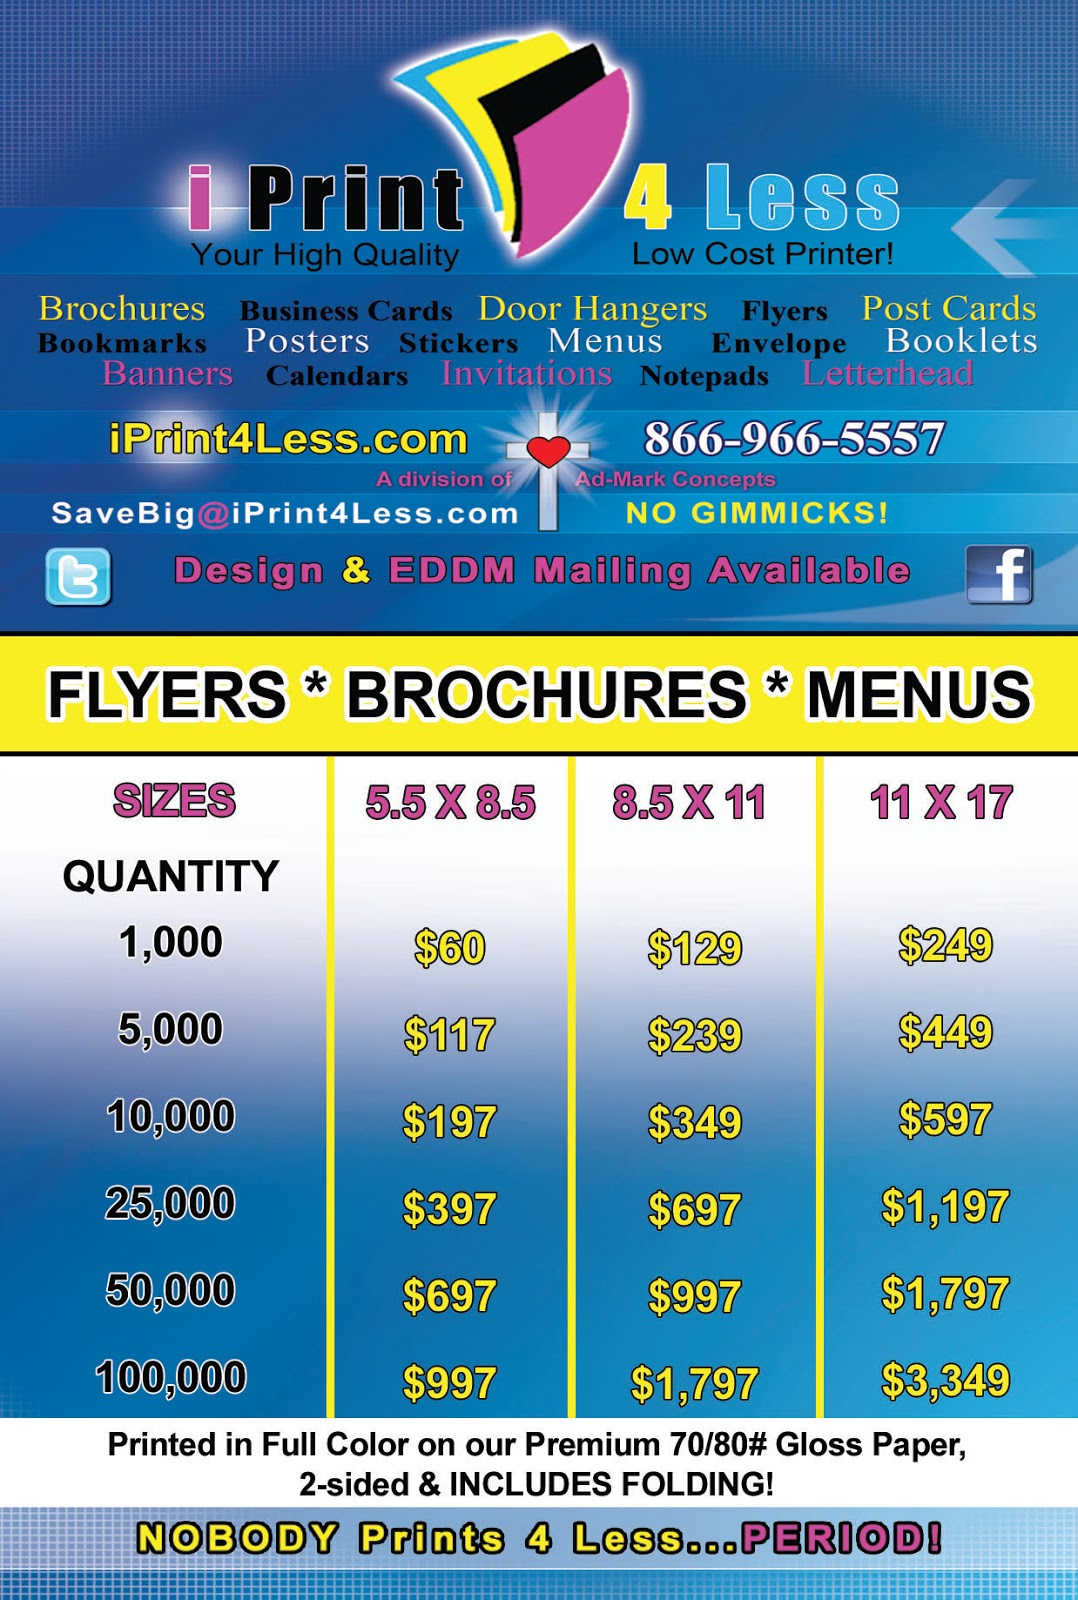 iPrint4Less: Cheap Brochures-10,000 8.5 x 11 Trifold Brochures-Only ...